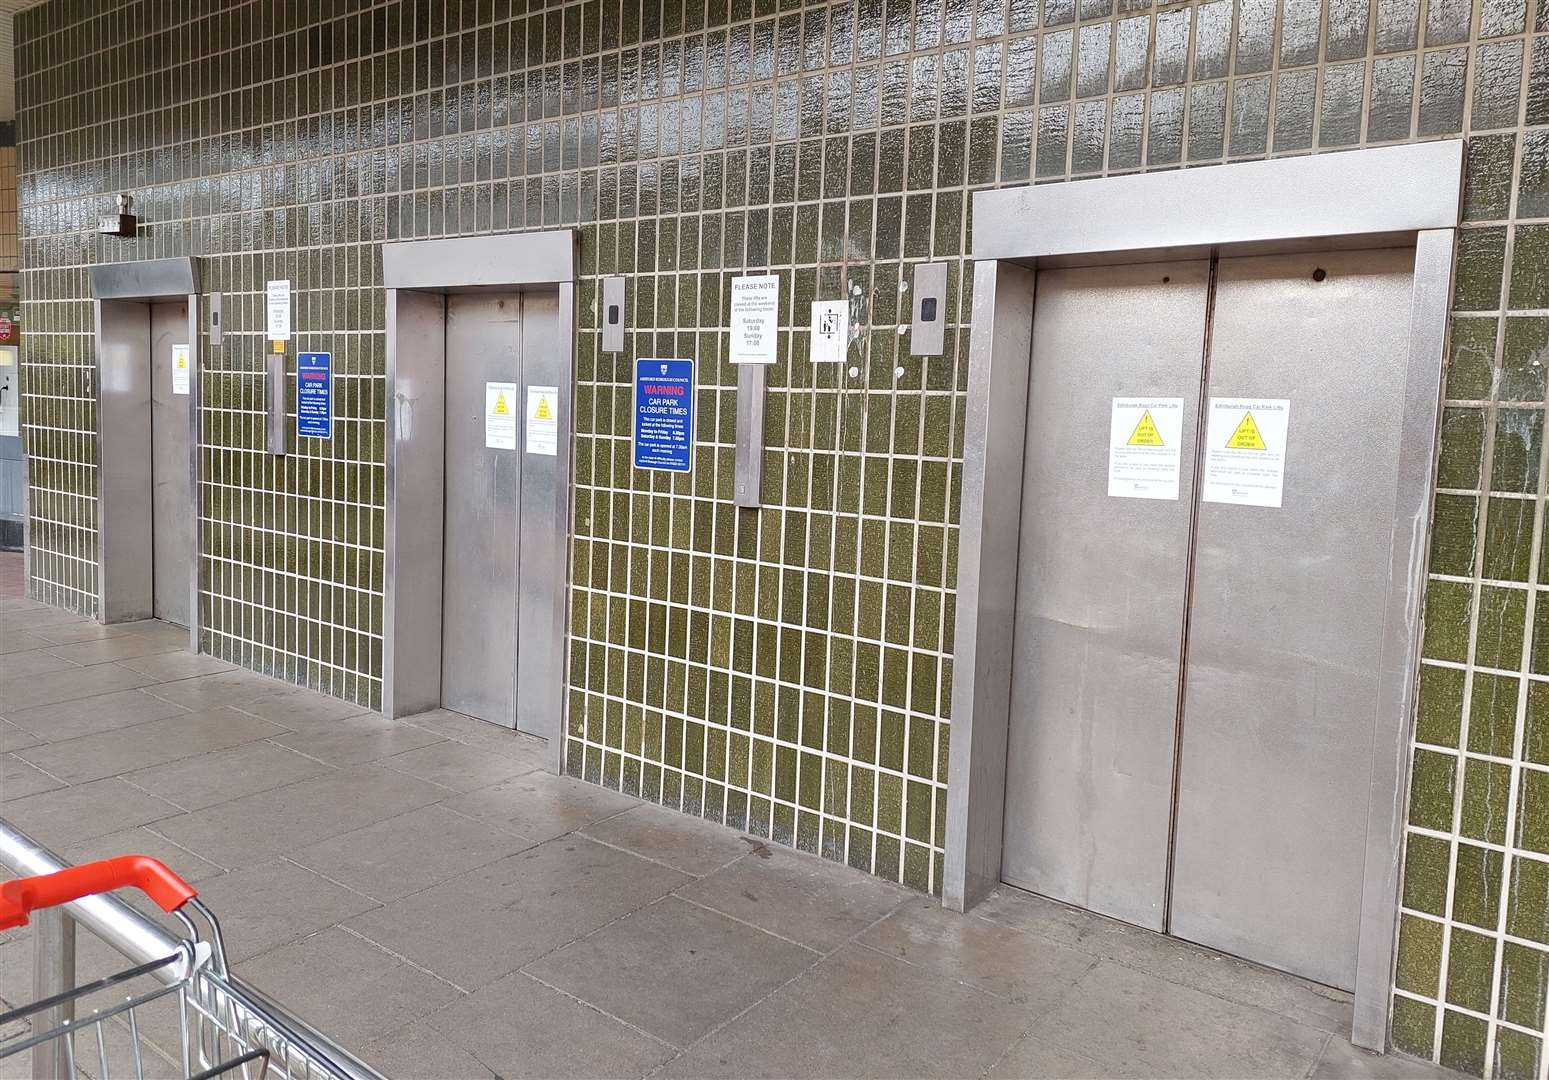 The lifts at the Edinburgh Road car park are closed